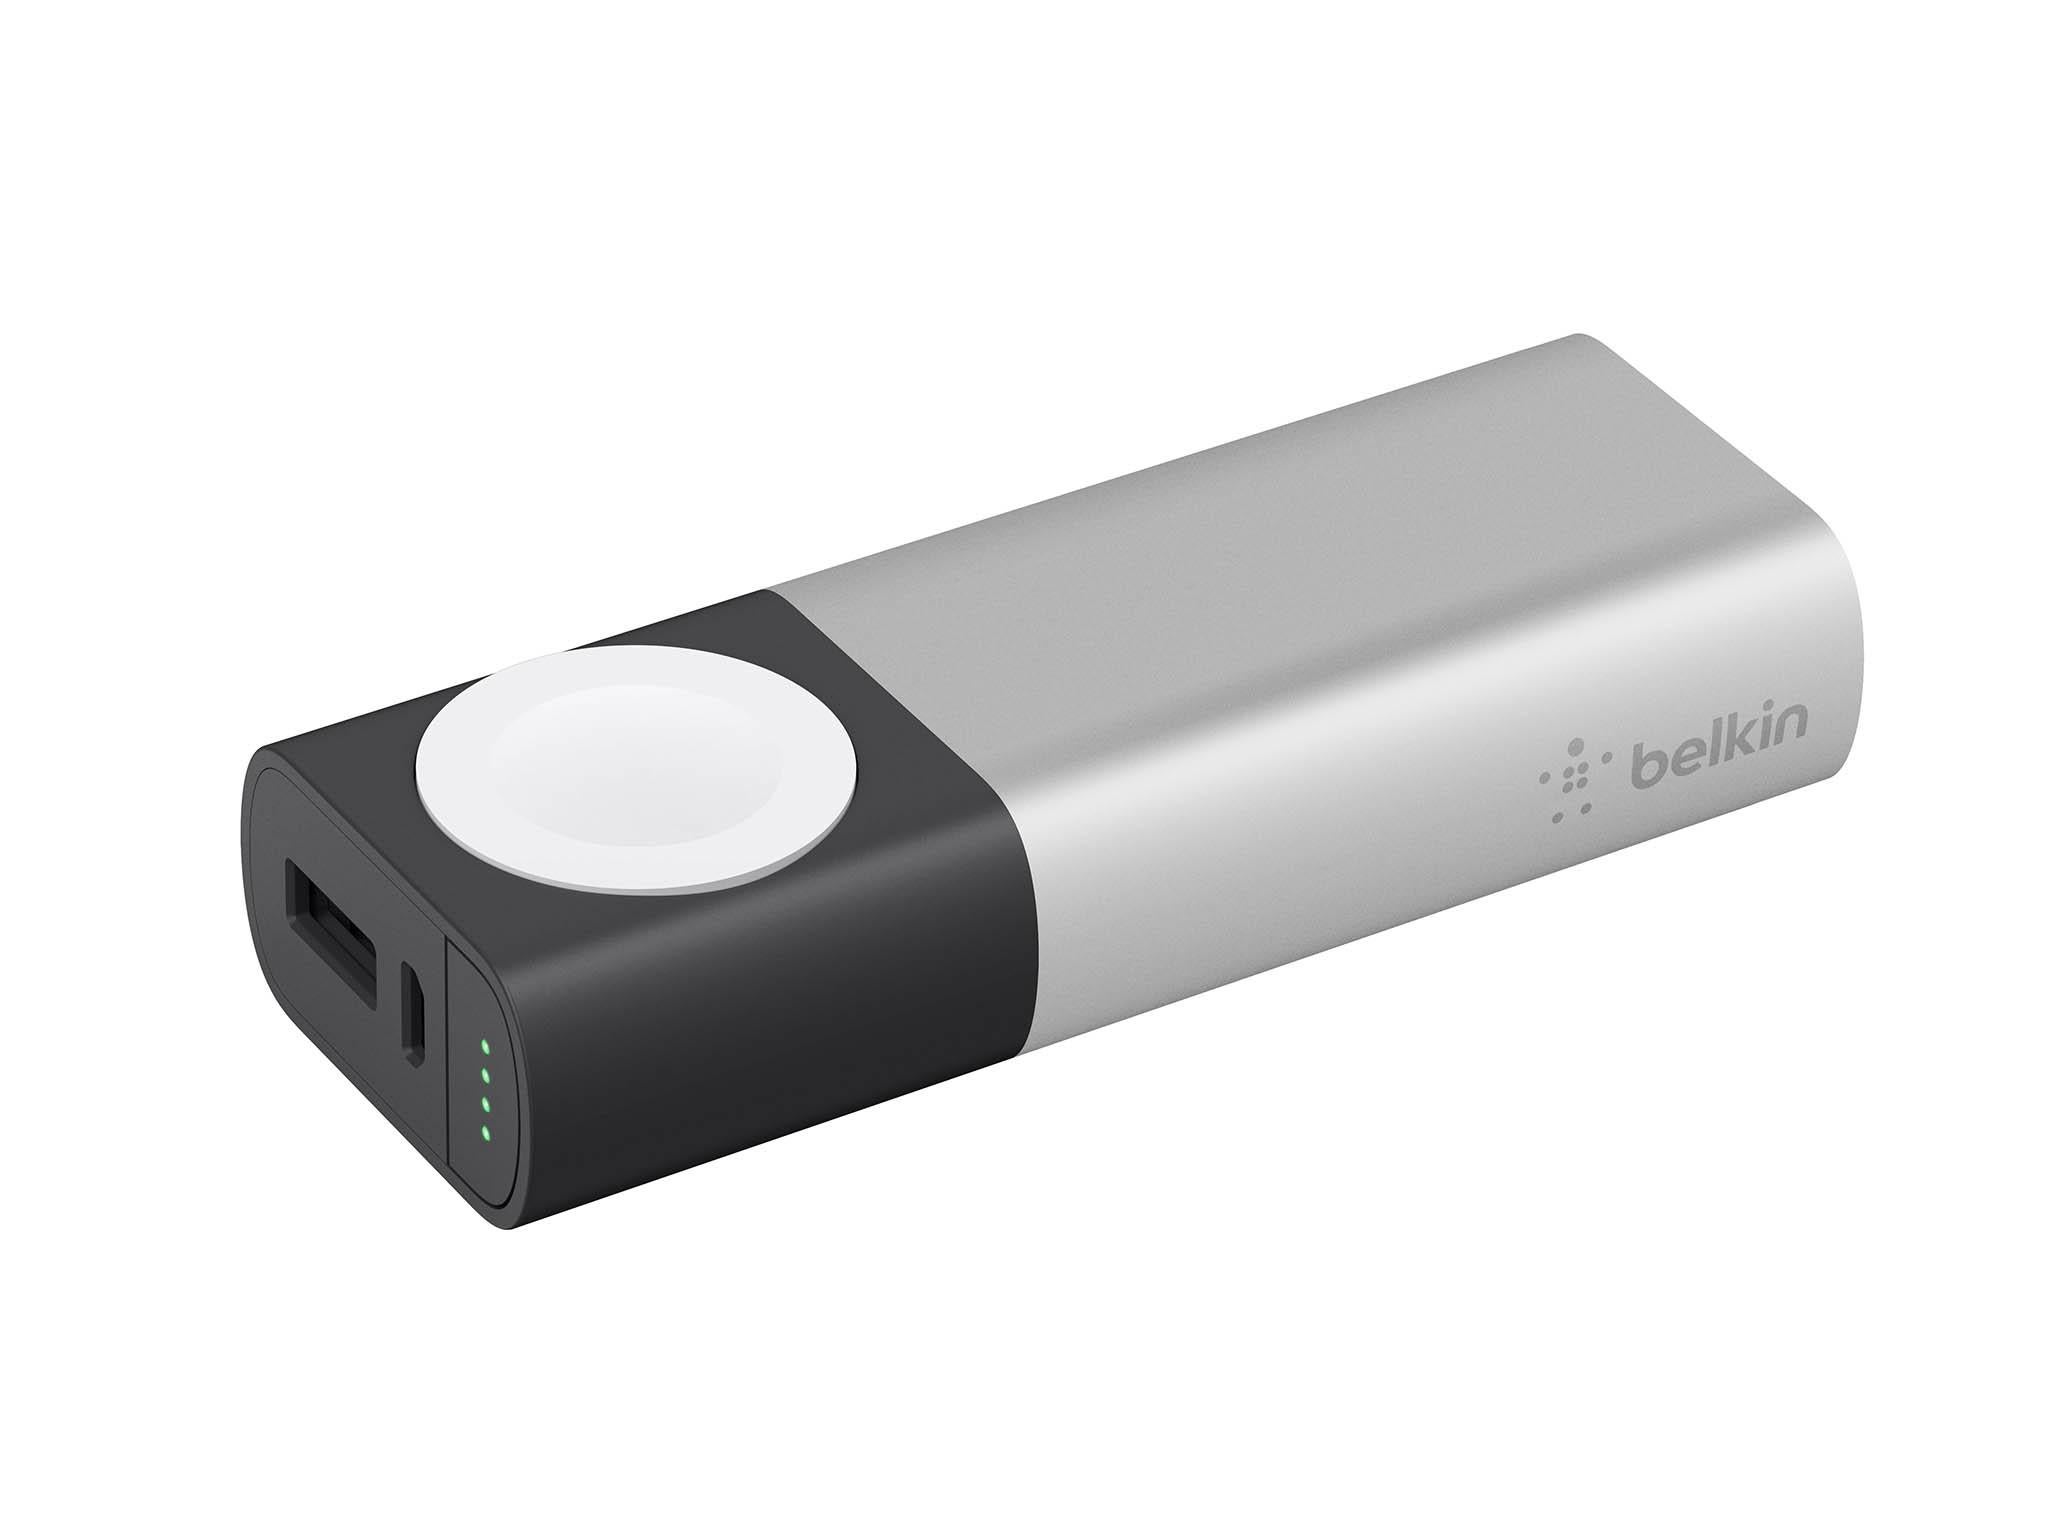 You'll never need to worry about your phone dying thanks to this portable charger (Belkin)